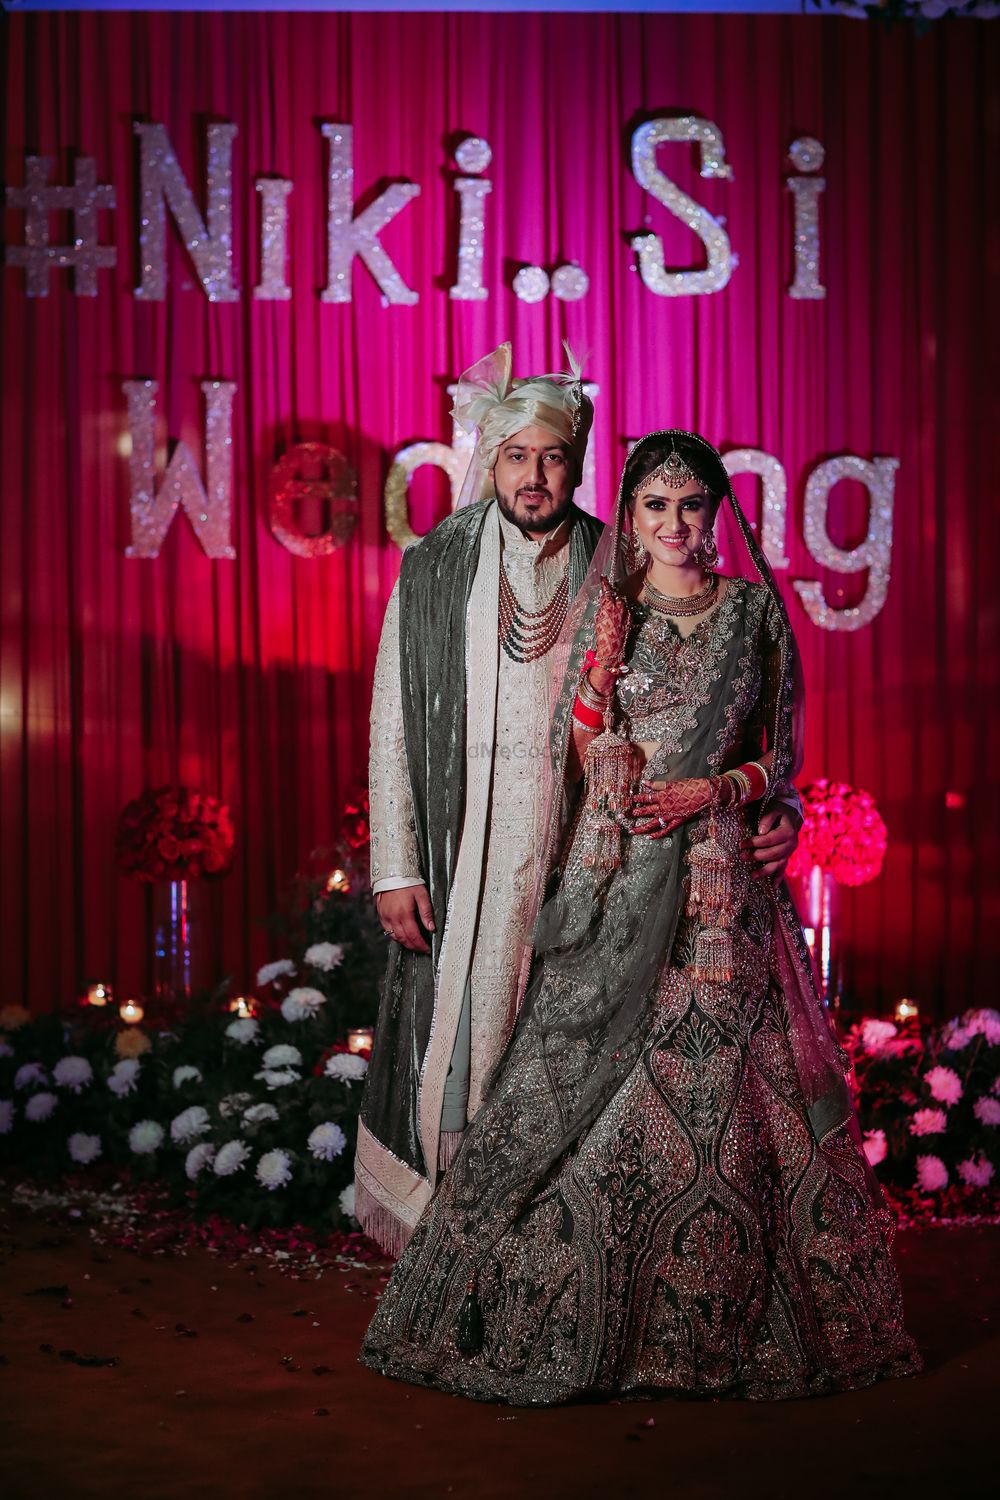 Photo From Siddhant and Nikita - By Omega Productions